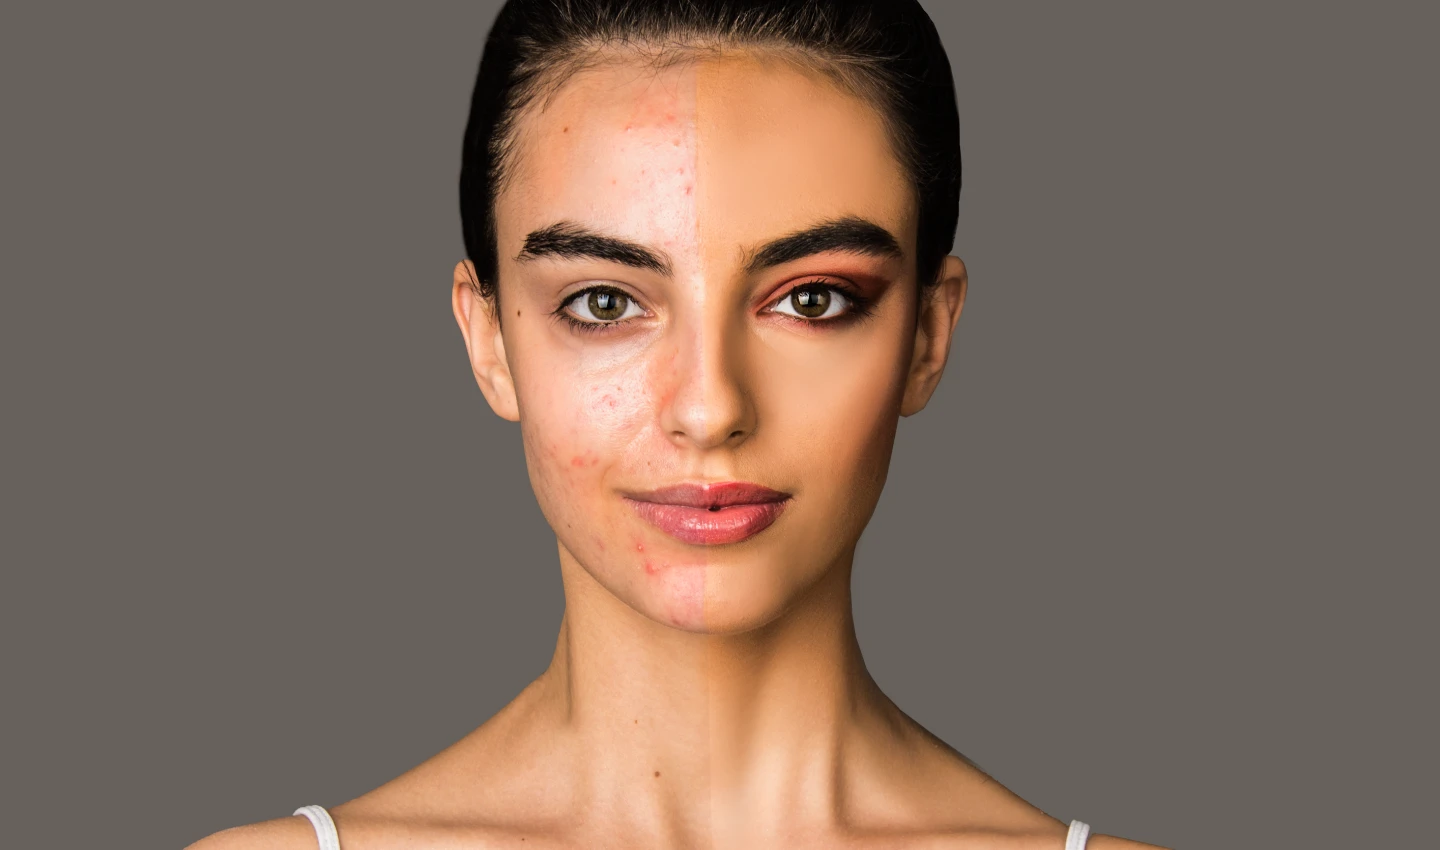 An image split in half, featuring a stunning young lady's face. One side of her face is pigmented and has no makeup, while the other side is even-colored and non-pigmented, with makeup applied. The image emphasizes the effects of hyperpigmentation and the importance of achieving clear and even skin.